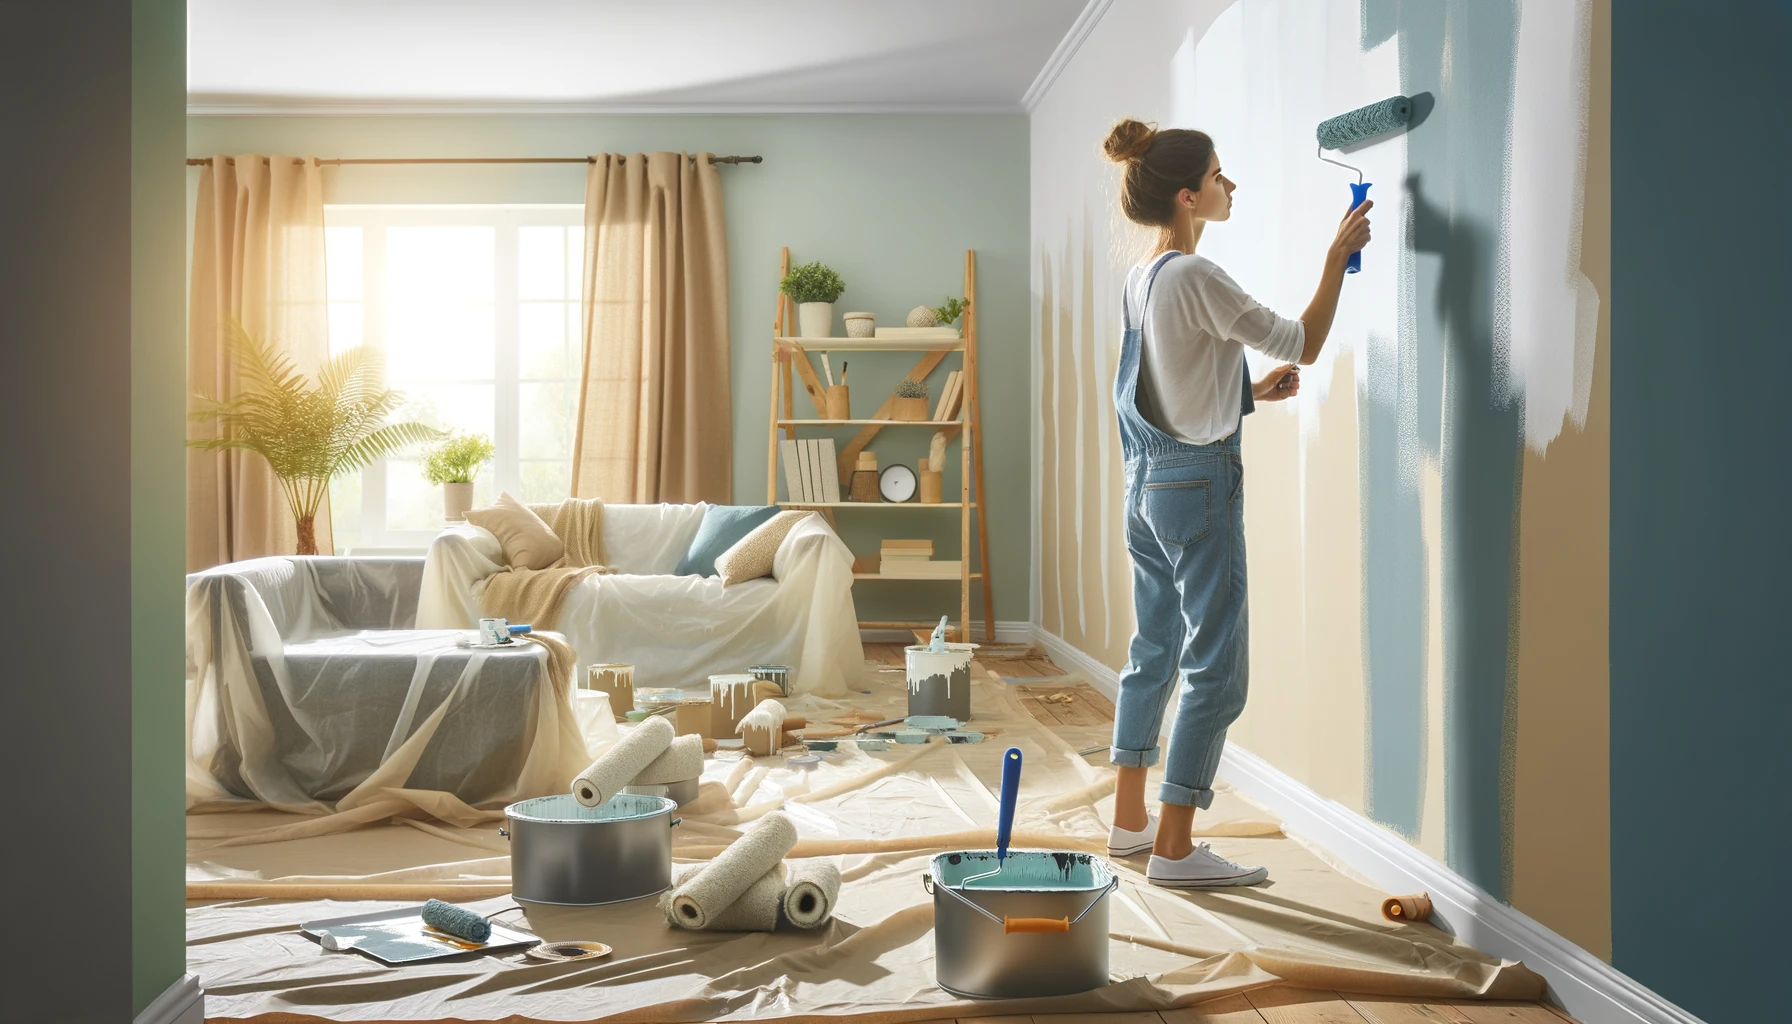 A woman in the process of painting a room, using paint rollers and brushes